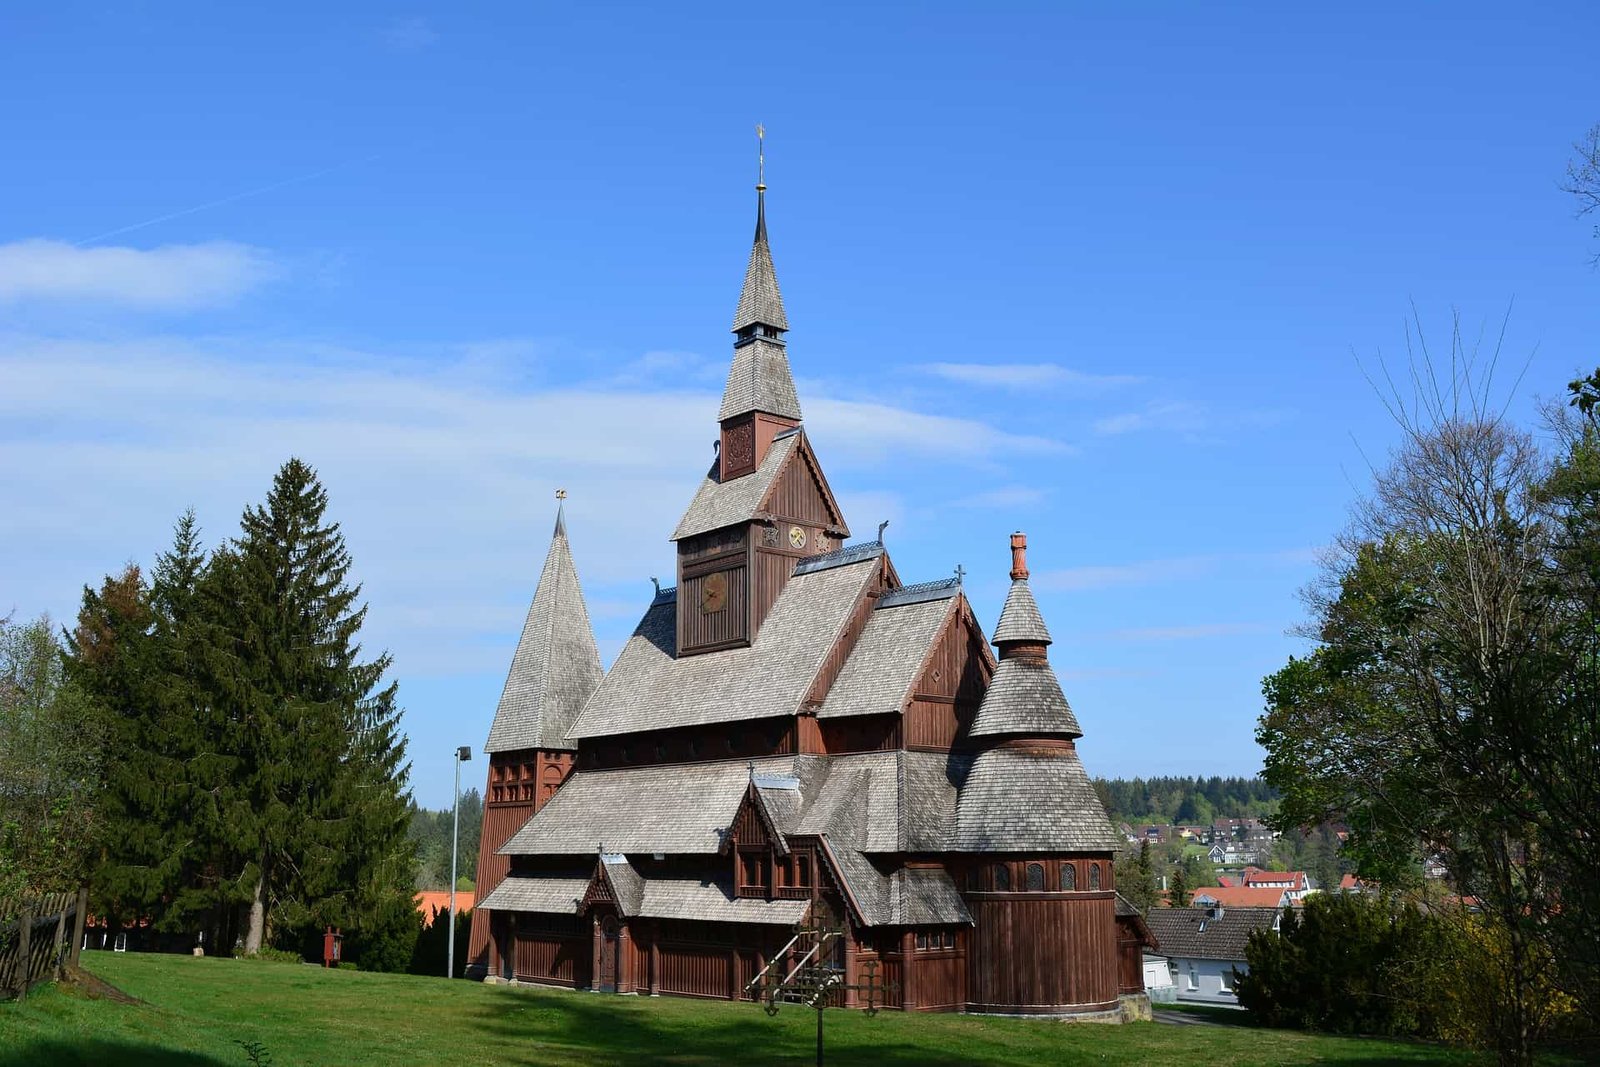 The Stave Churches